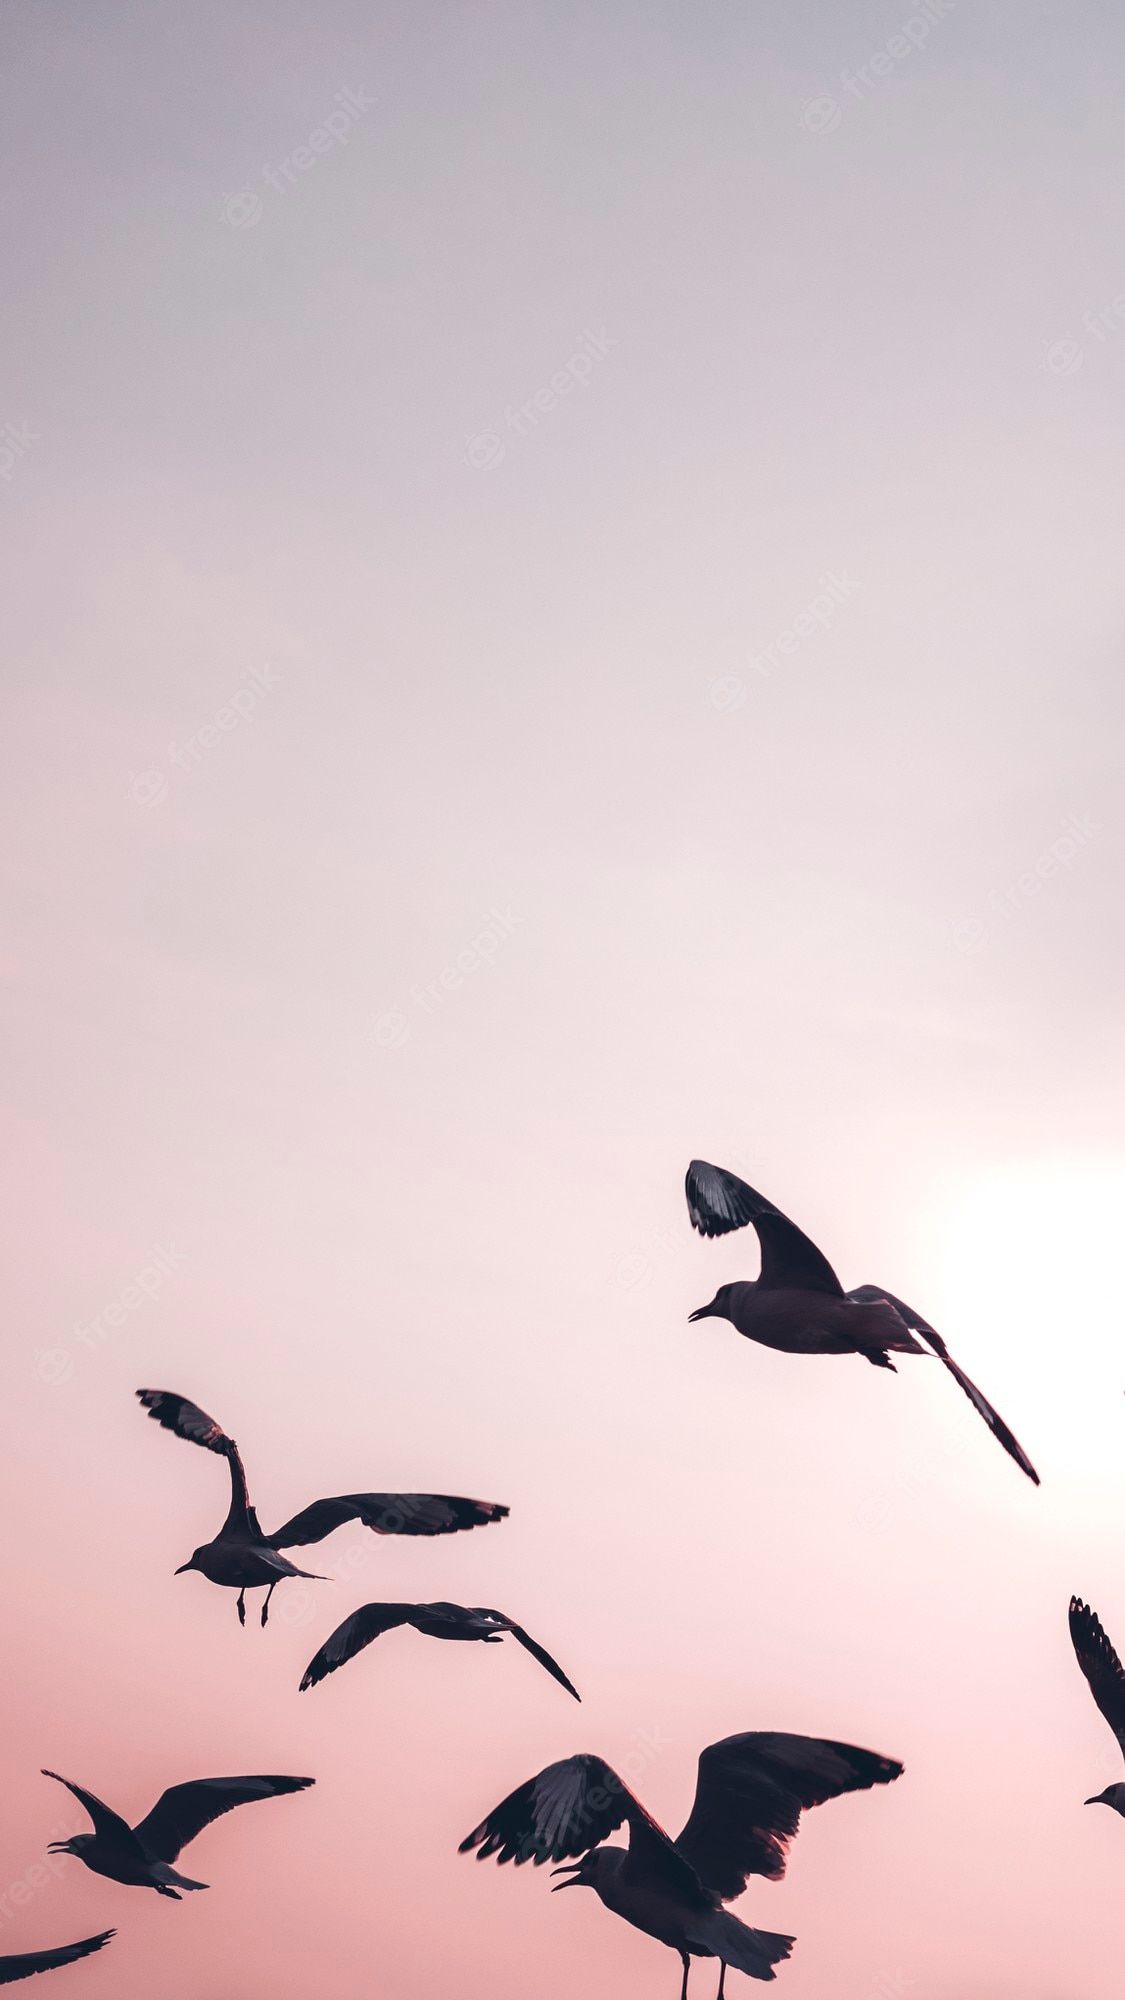 A flock of seagulls flying in the sky - 